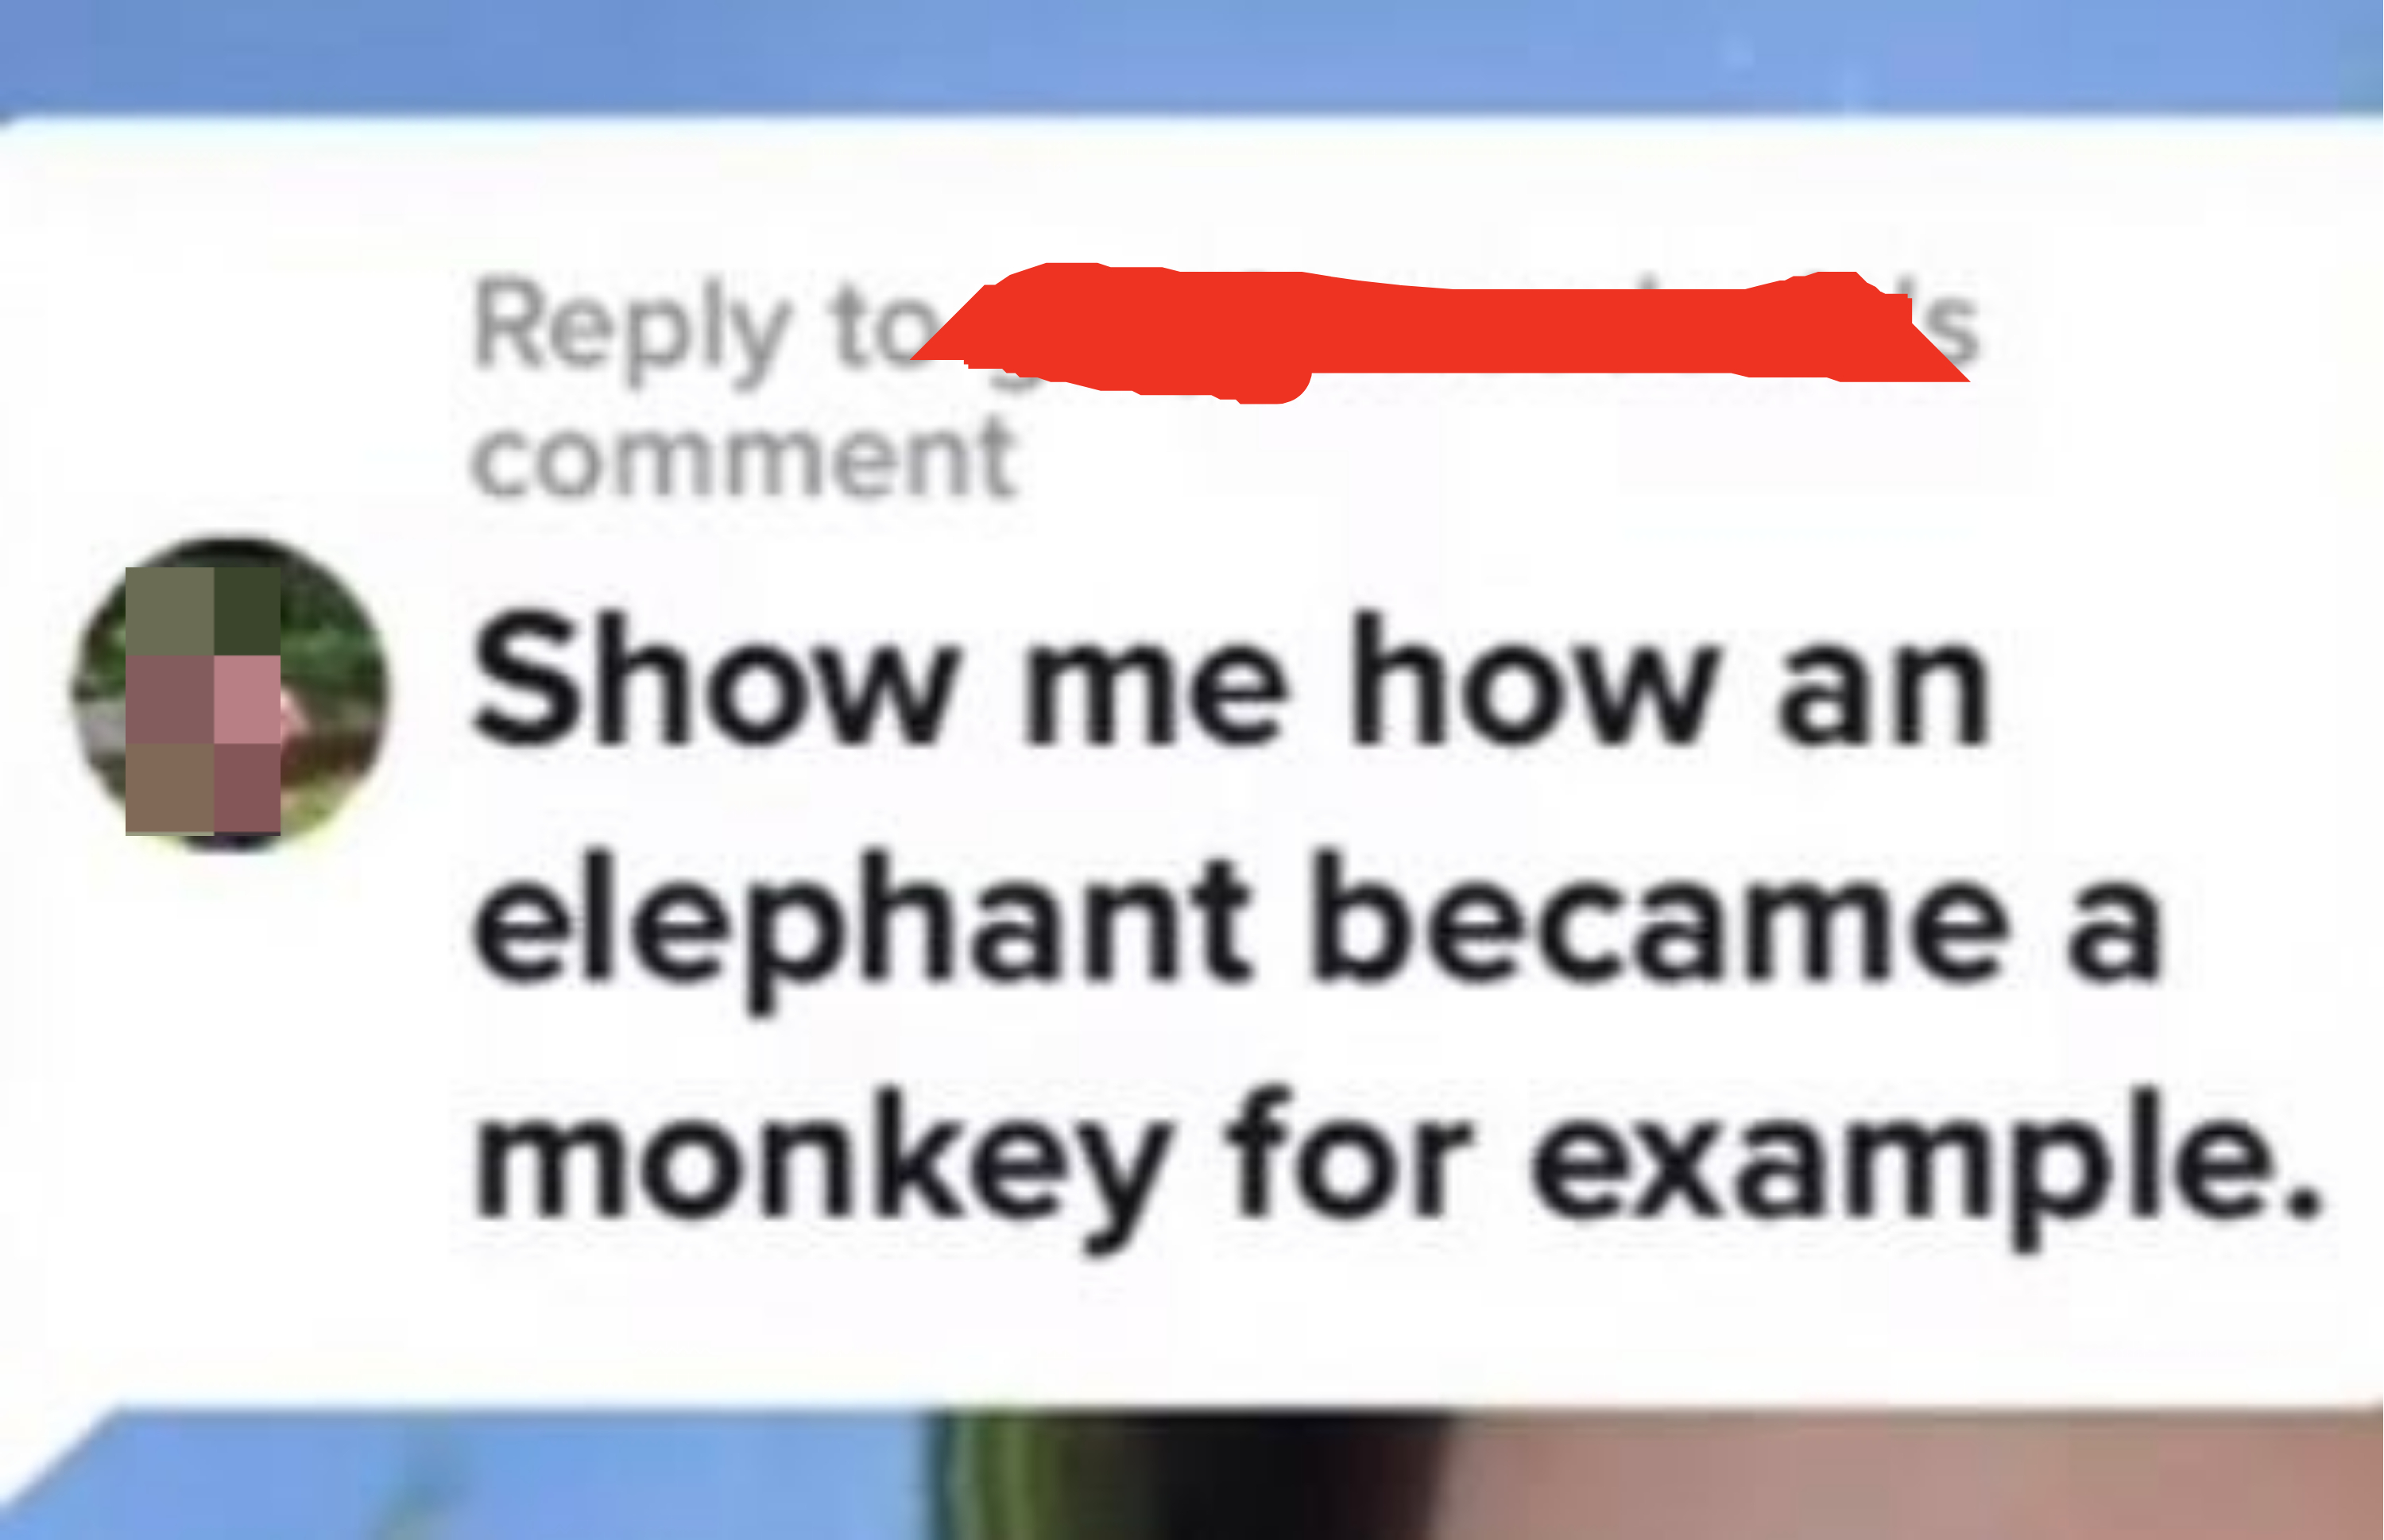 &quot;Show me how an elephant became a monkey for example.&quot;